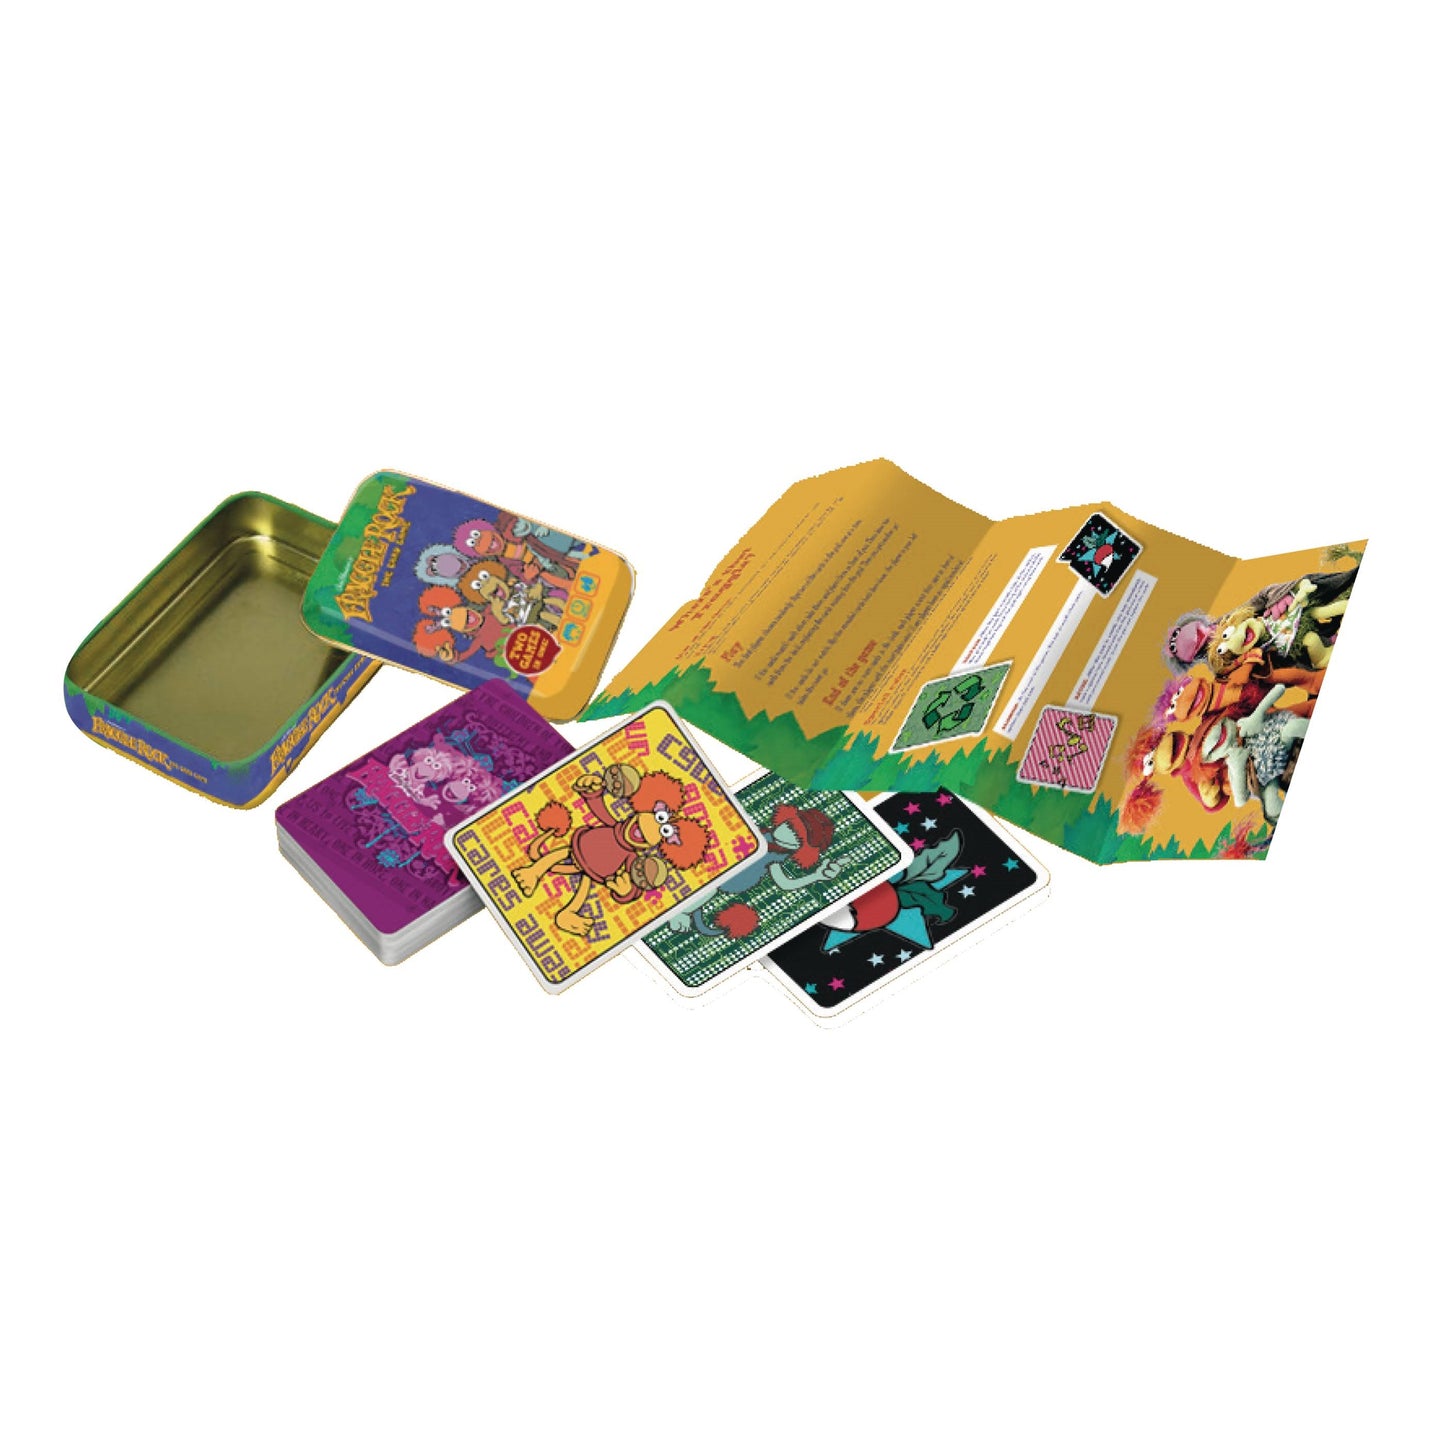 Fraggle Rock! The Card Game